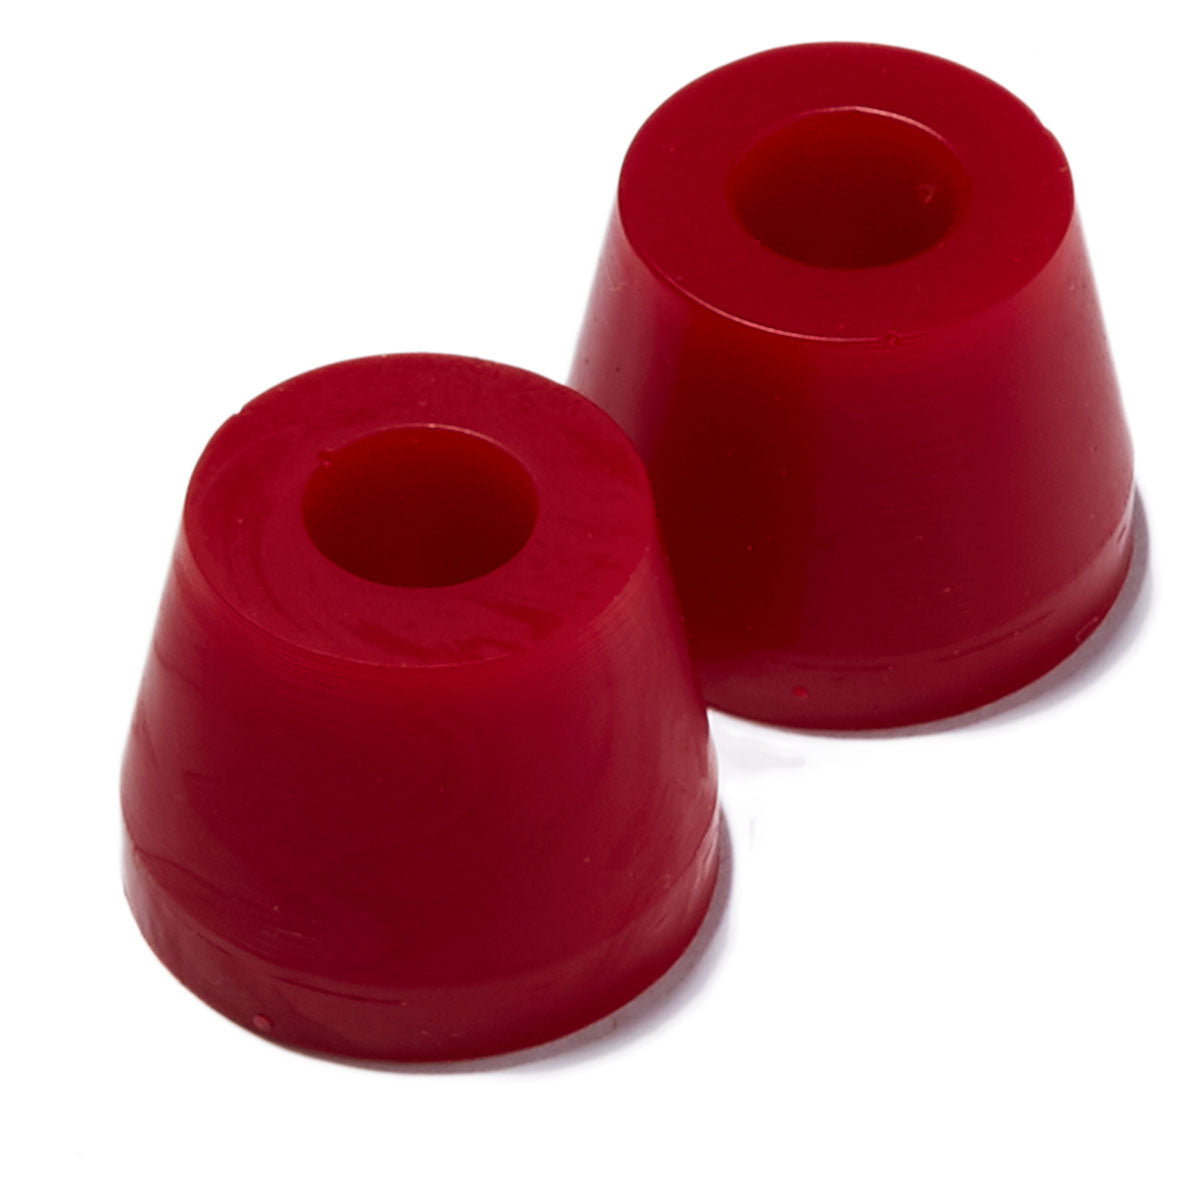 RipTide Tall Cone Bushings - APS 95a image 1